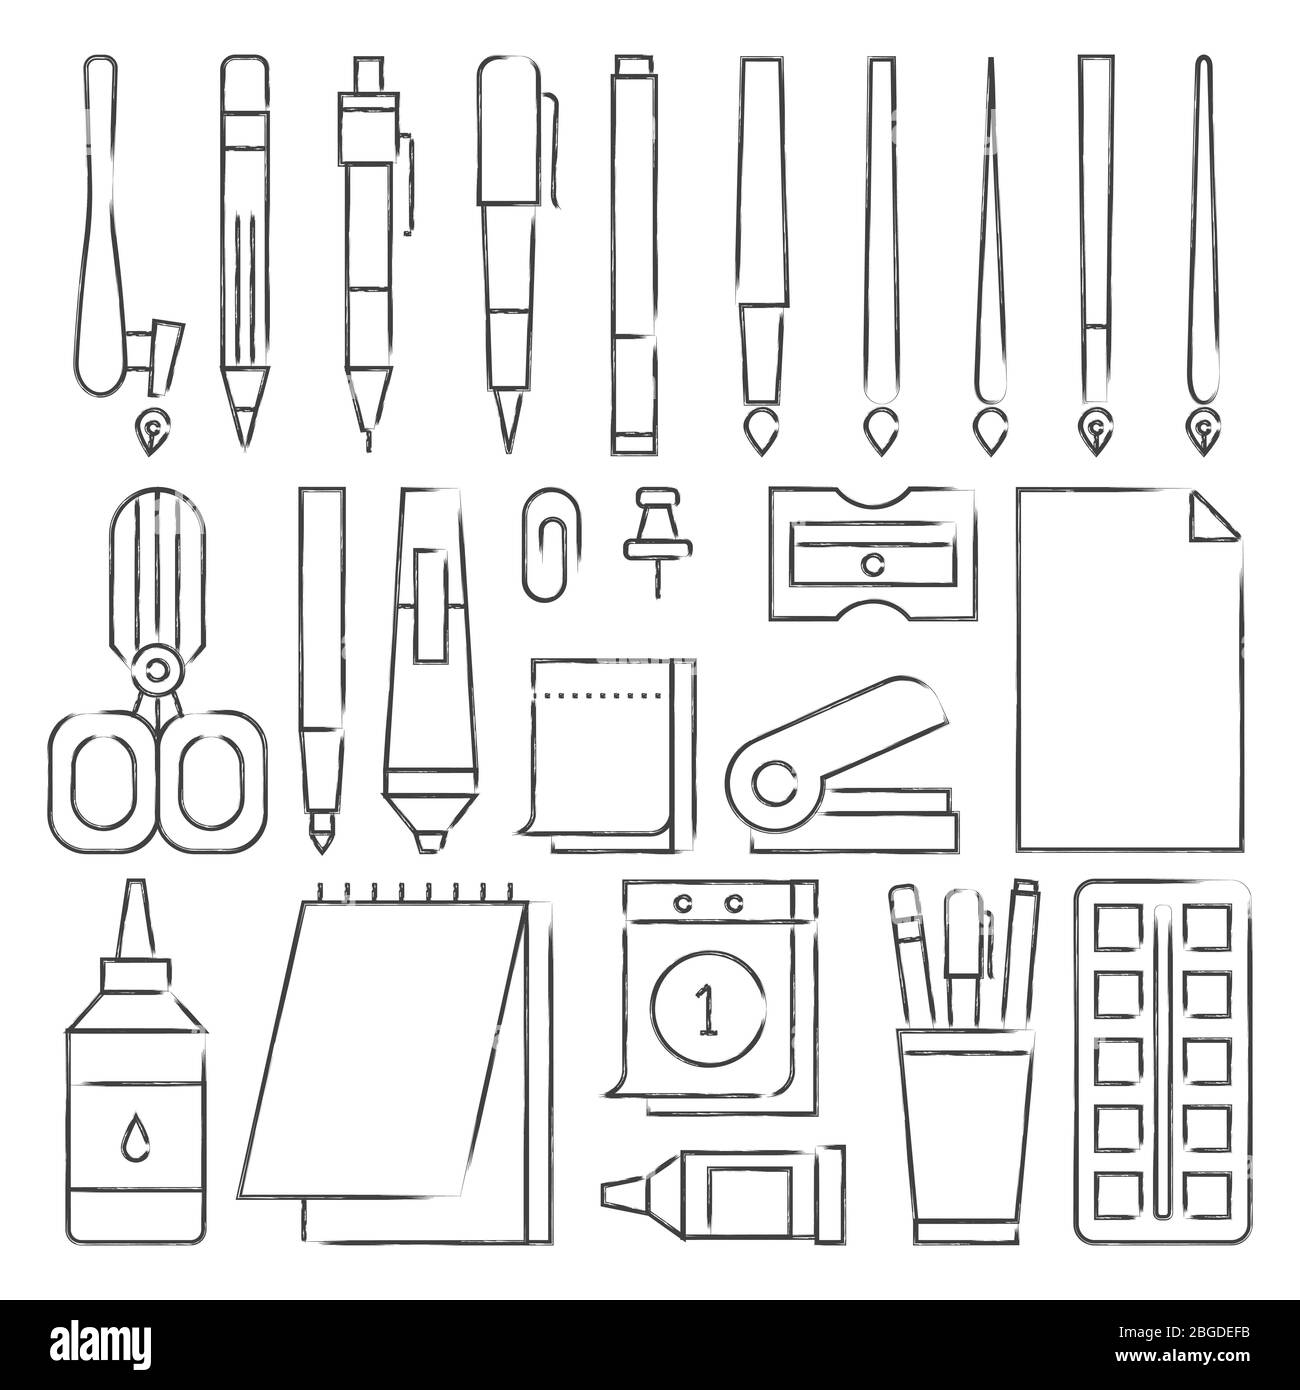 Stationery art materials line drawing pens Vector Image